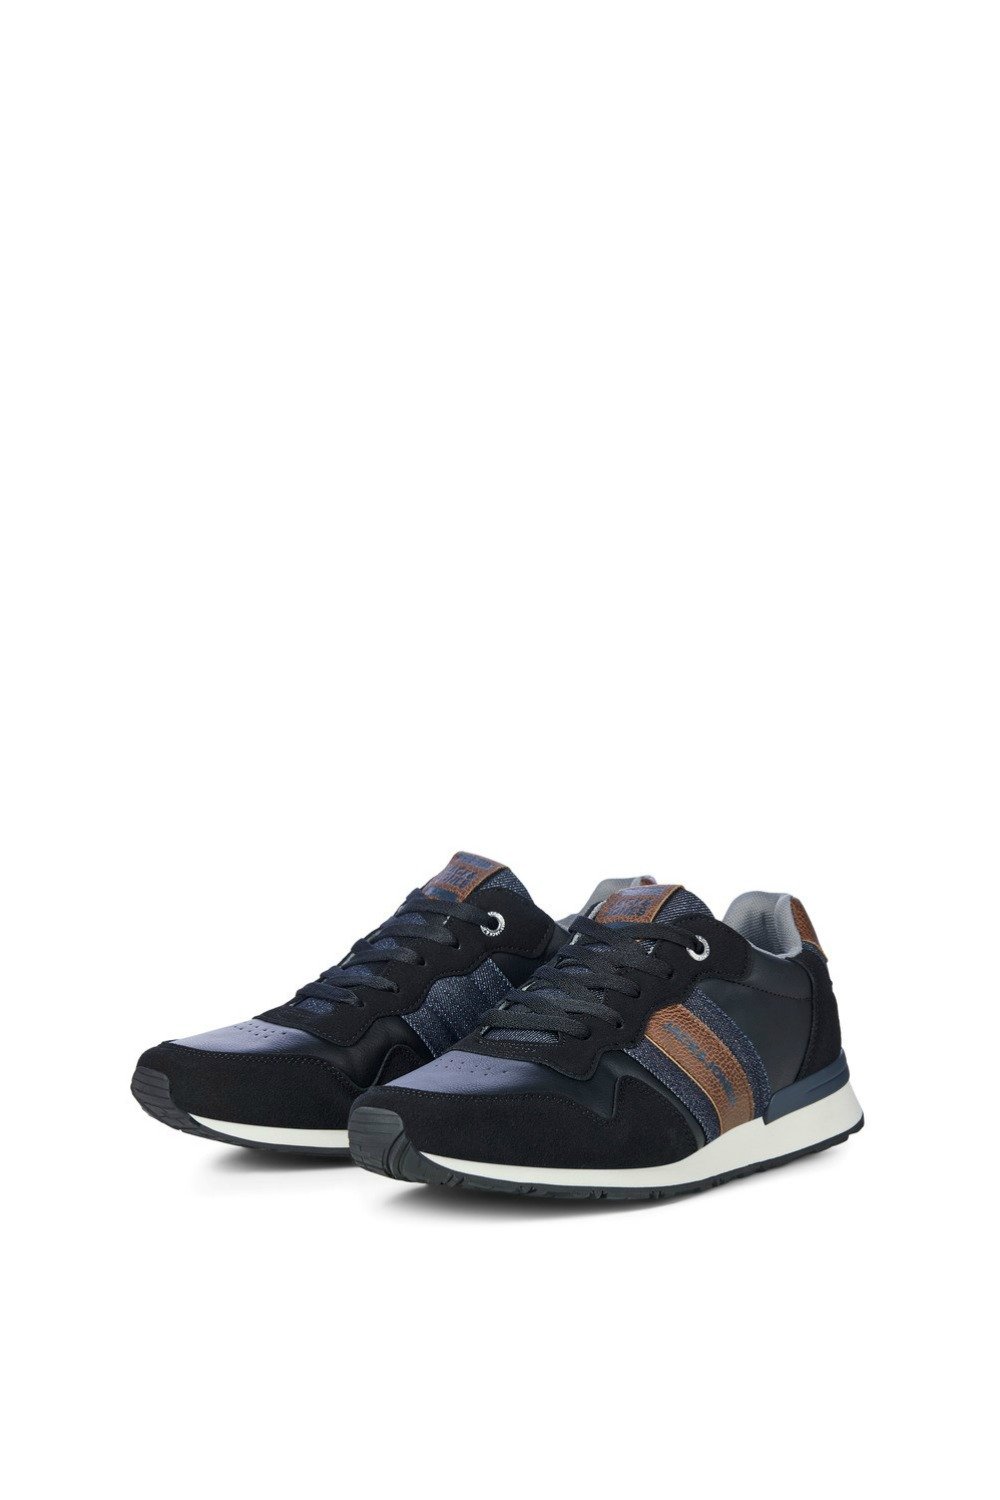 JFWSTELLAR CASUAL ANTHRACITE STS SHOES